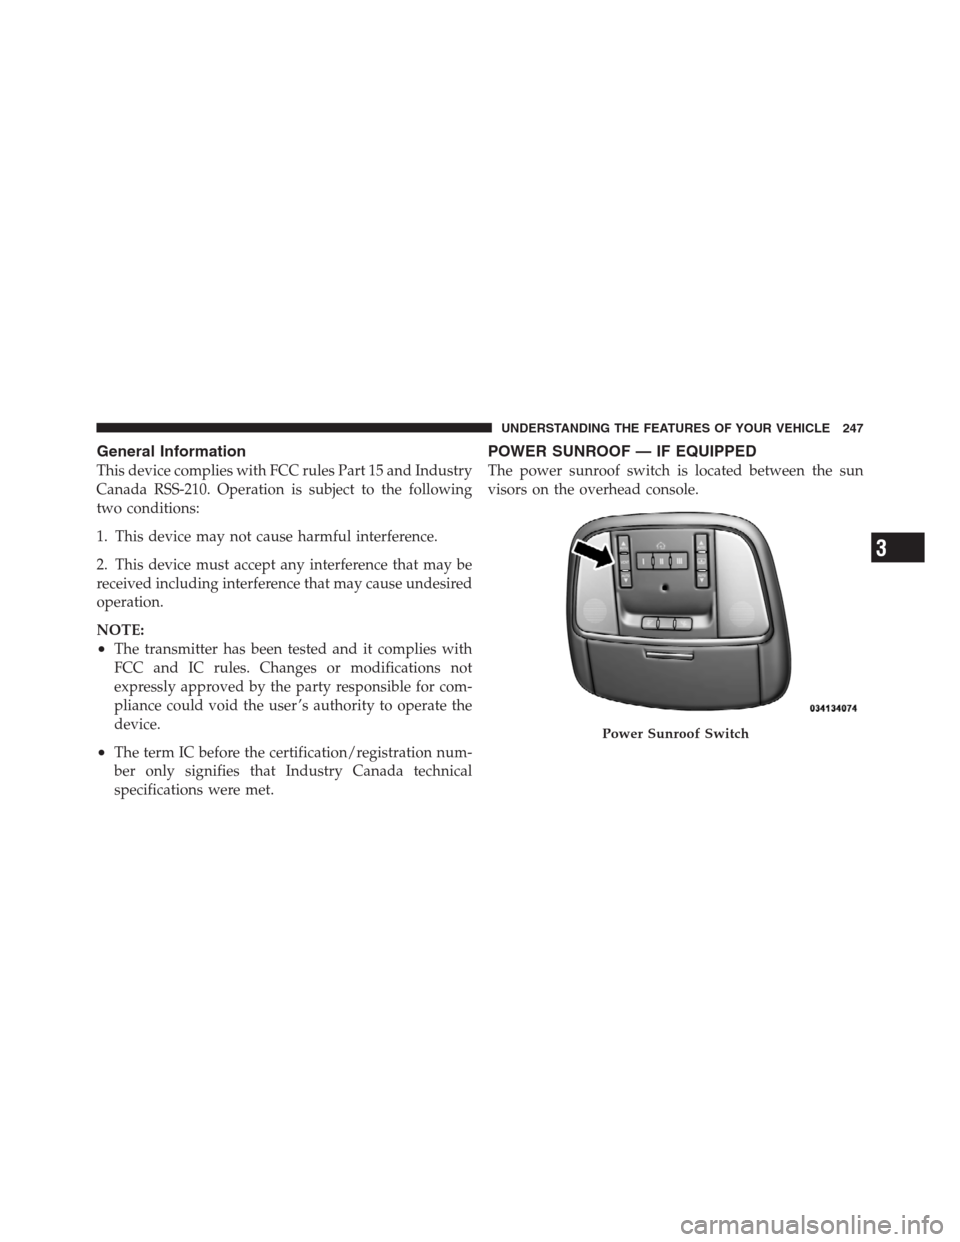 CHRYSLER 300 2012 2.G Owners Manual General Information
This device complies with FCC rules Part 15 and Industry
Canada RSS-210. Operation is subject to the following
two conditions:
1. This device may not cause harmful interference.
2.